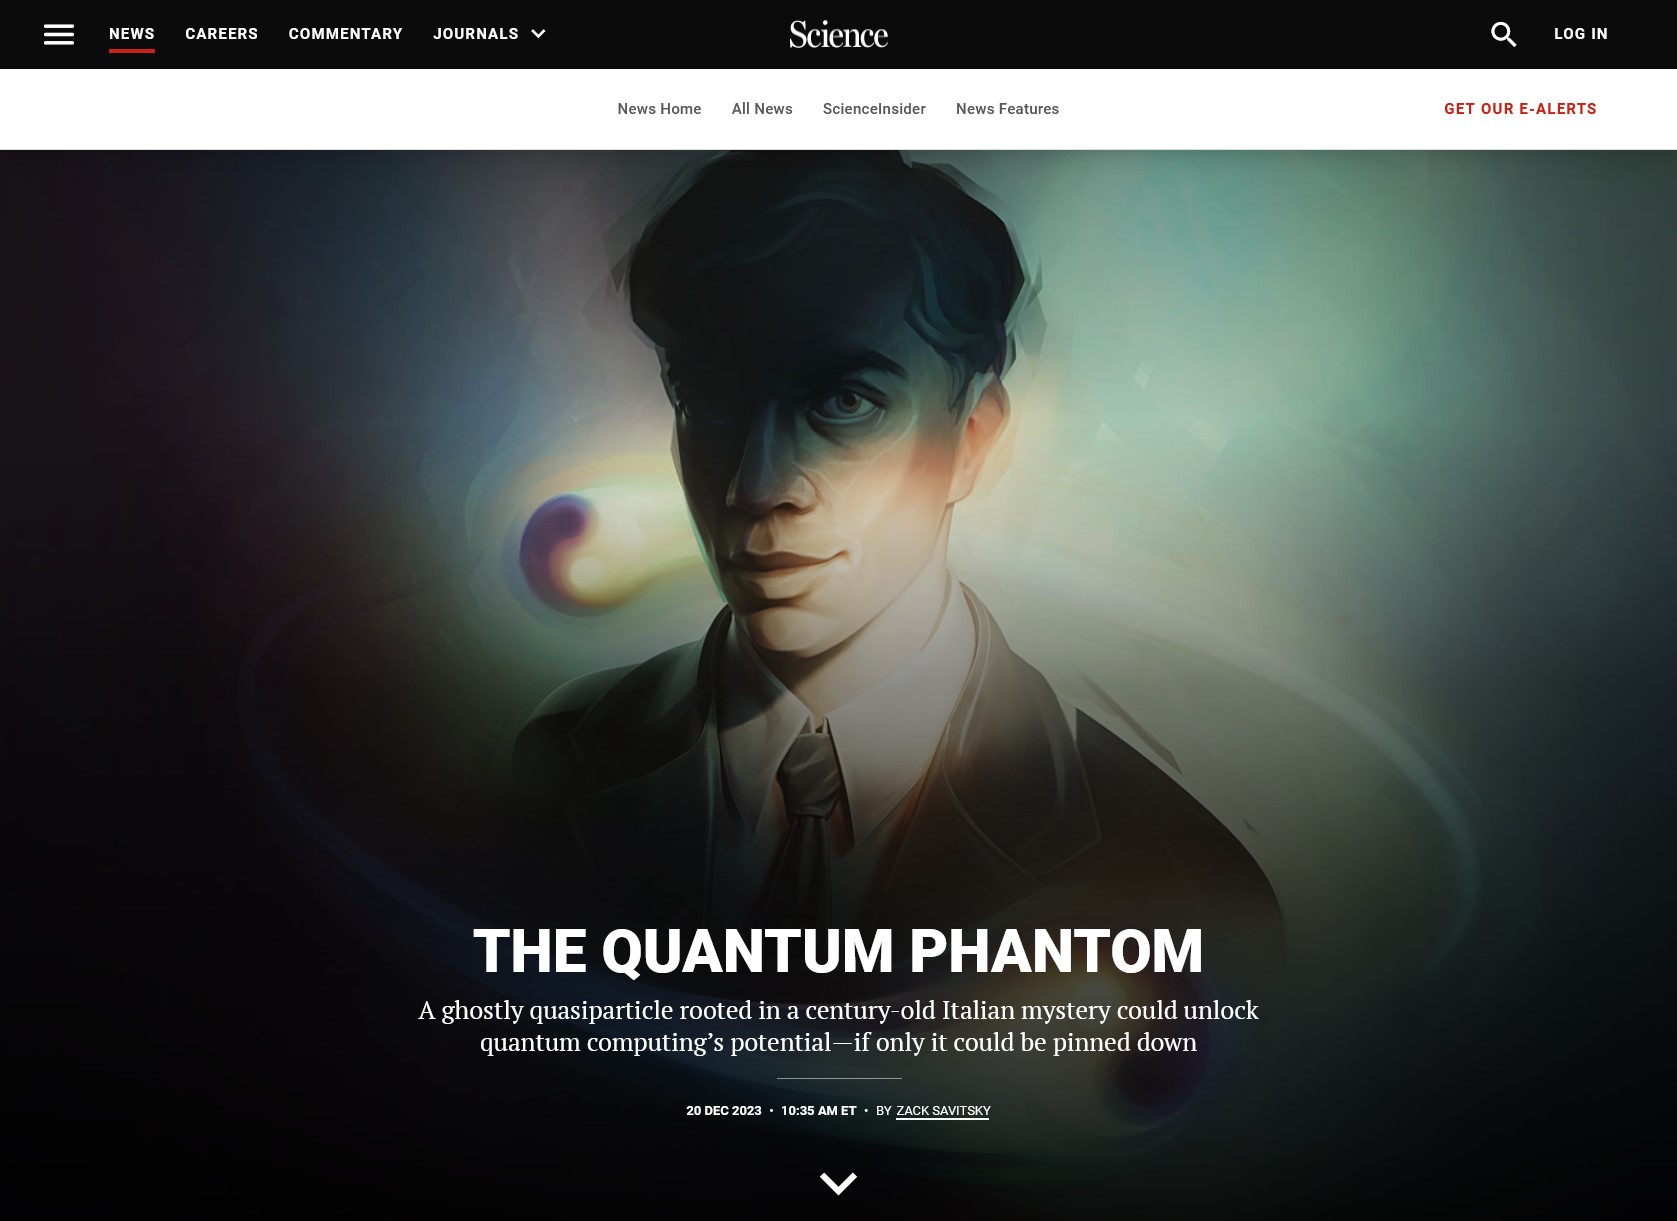 Screenshot: Webpage on Science.org showing a painted portrait illustration of physicist Ettore Majorana, dramatically lit and partially in shadow, with anyons / Majorana fermions orbiting around him. Text over the image: The Quantum Phantom. A ghostly quasiparticle rooted in a century-old Italian mystery could unlock quantum computing’s potential—if only it could be pinned down. 20 Dec 2023 - 10:35 AM ET - By Zack Savitsky https://www.science.org/content/article/ghostly-quasiparticle-rooted-century-old-mystery-unlock-quantum-computings-potential Art by Olena Shmahalo for Science Magazine / AAAS.